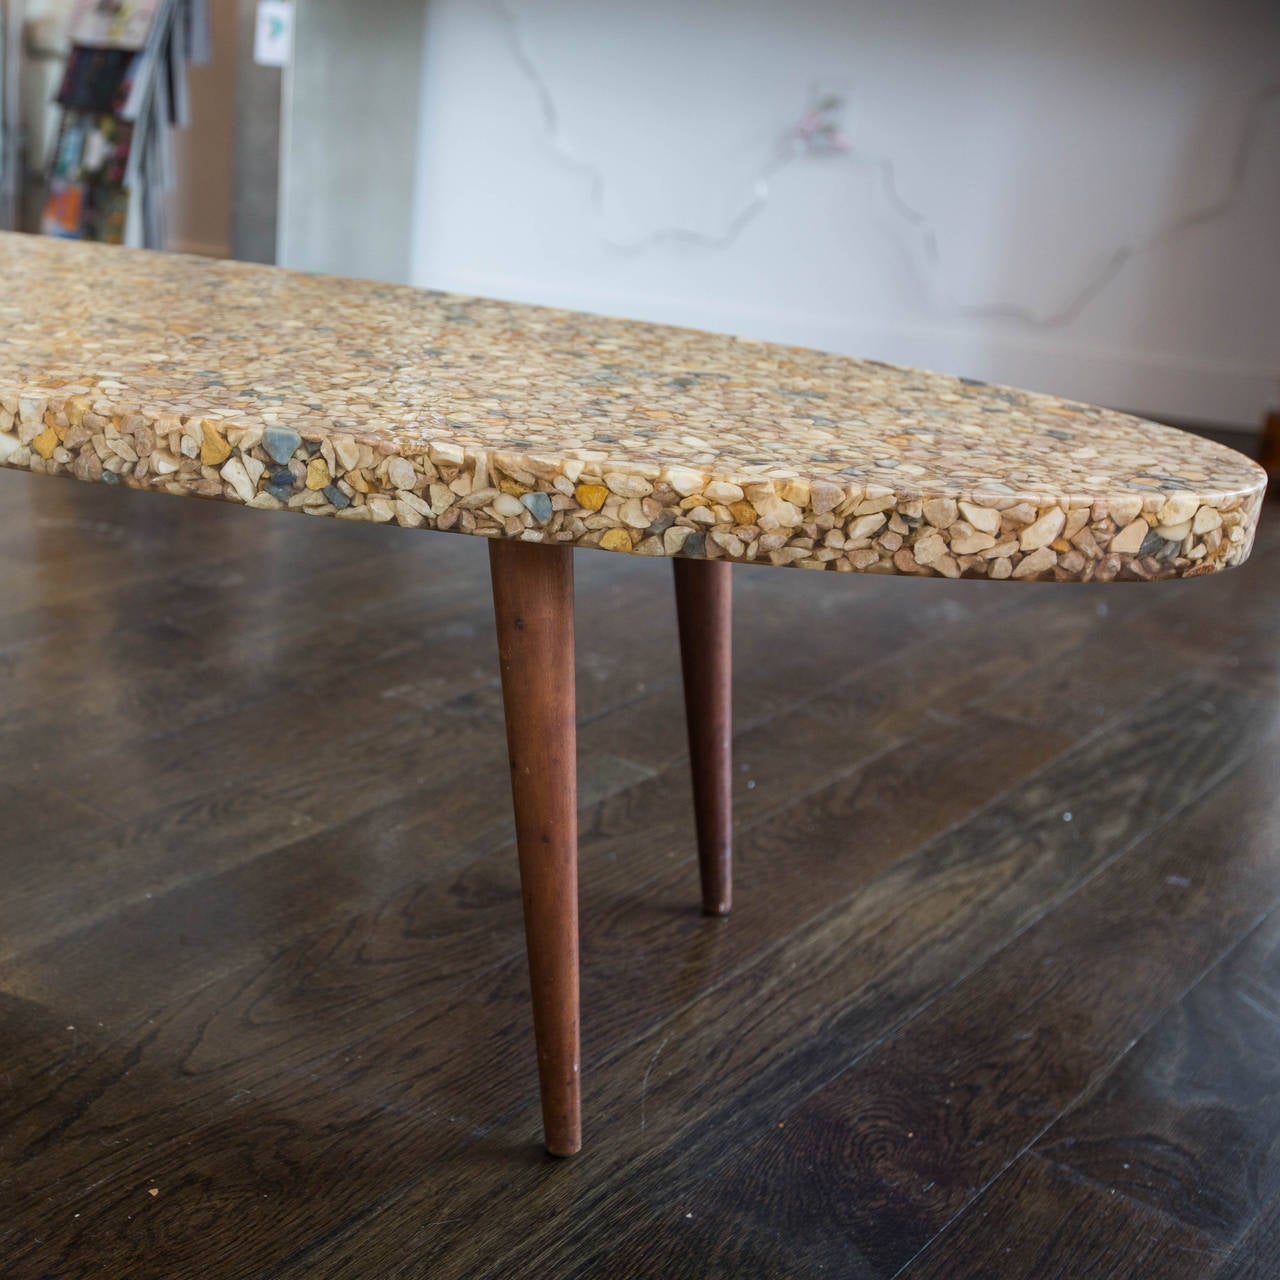 Mid-Century Modern Vintage Surfboard Coffee Table Made of River Rock in Resin